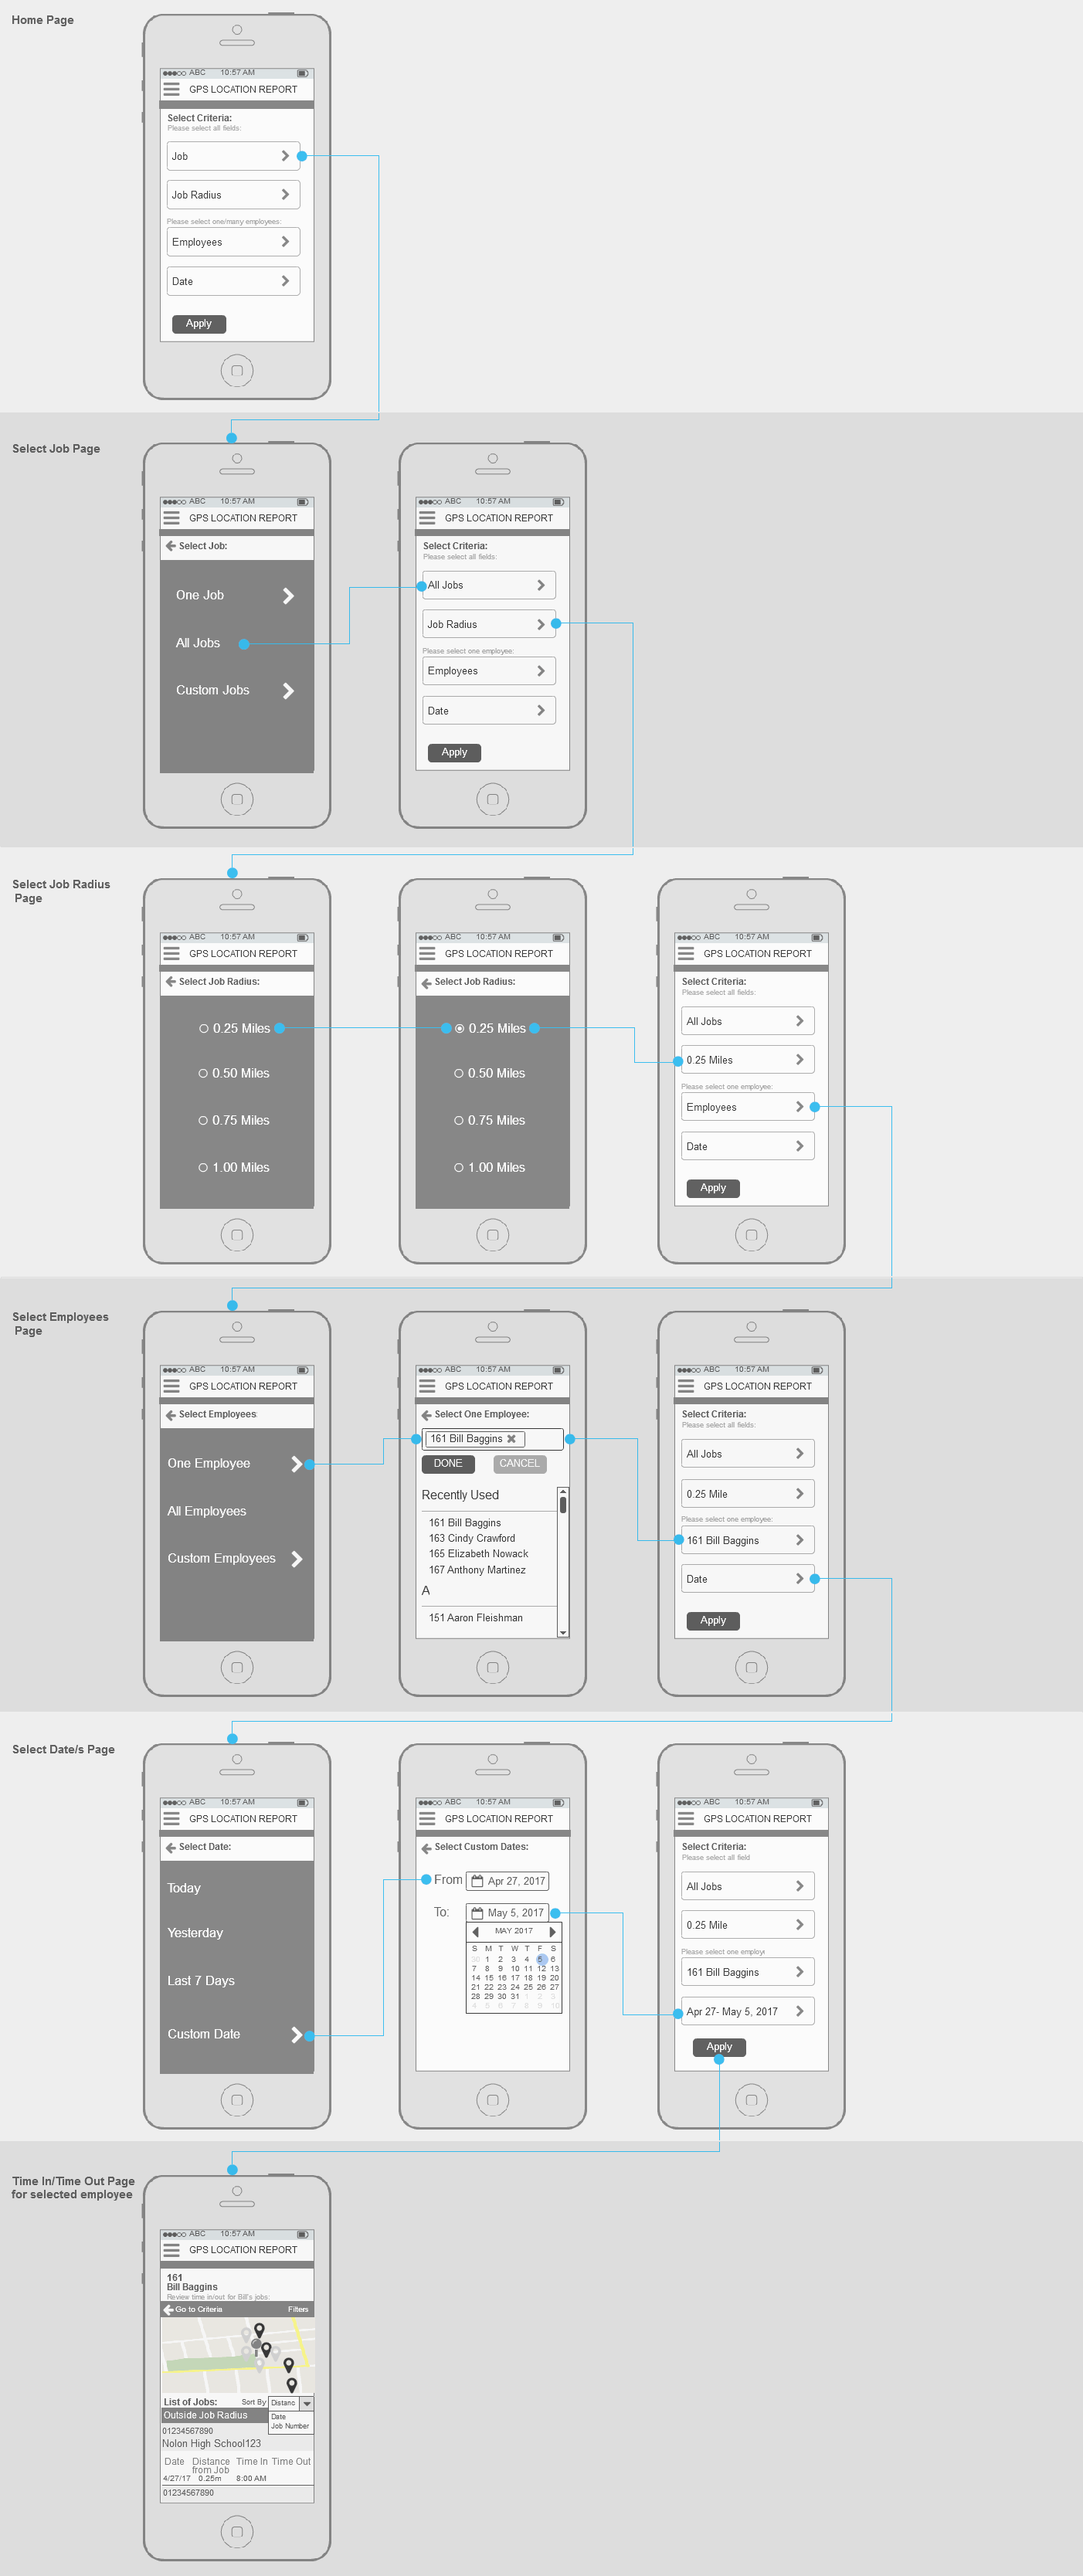 The wireframes show the flow the user will take to reach their desired results